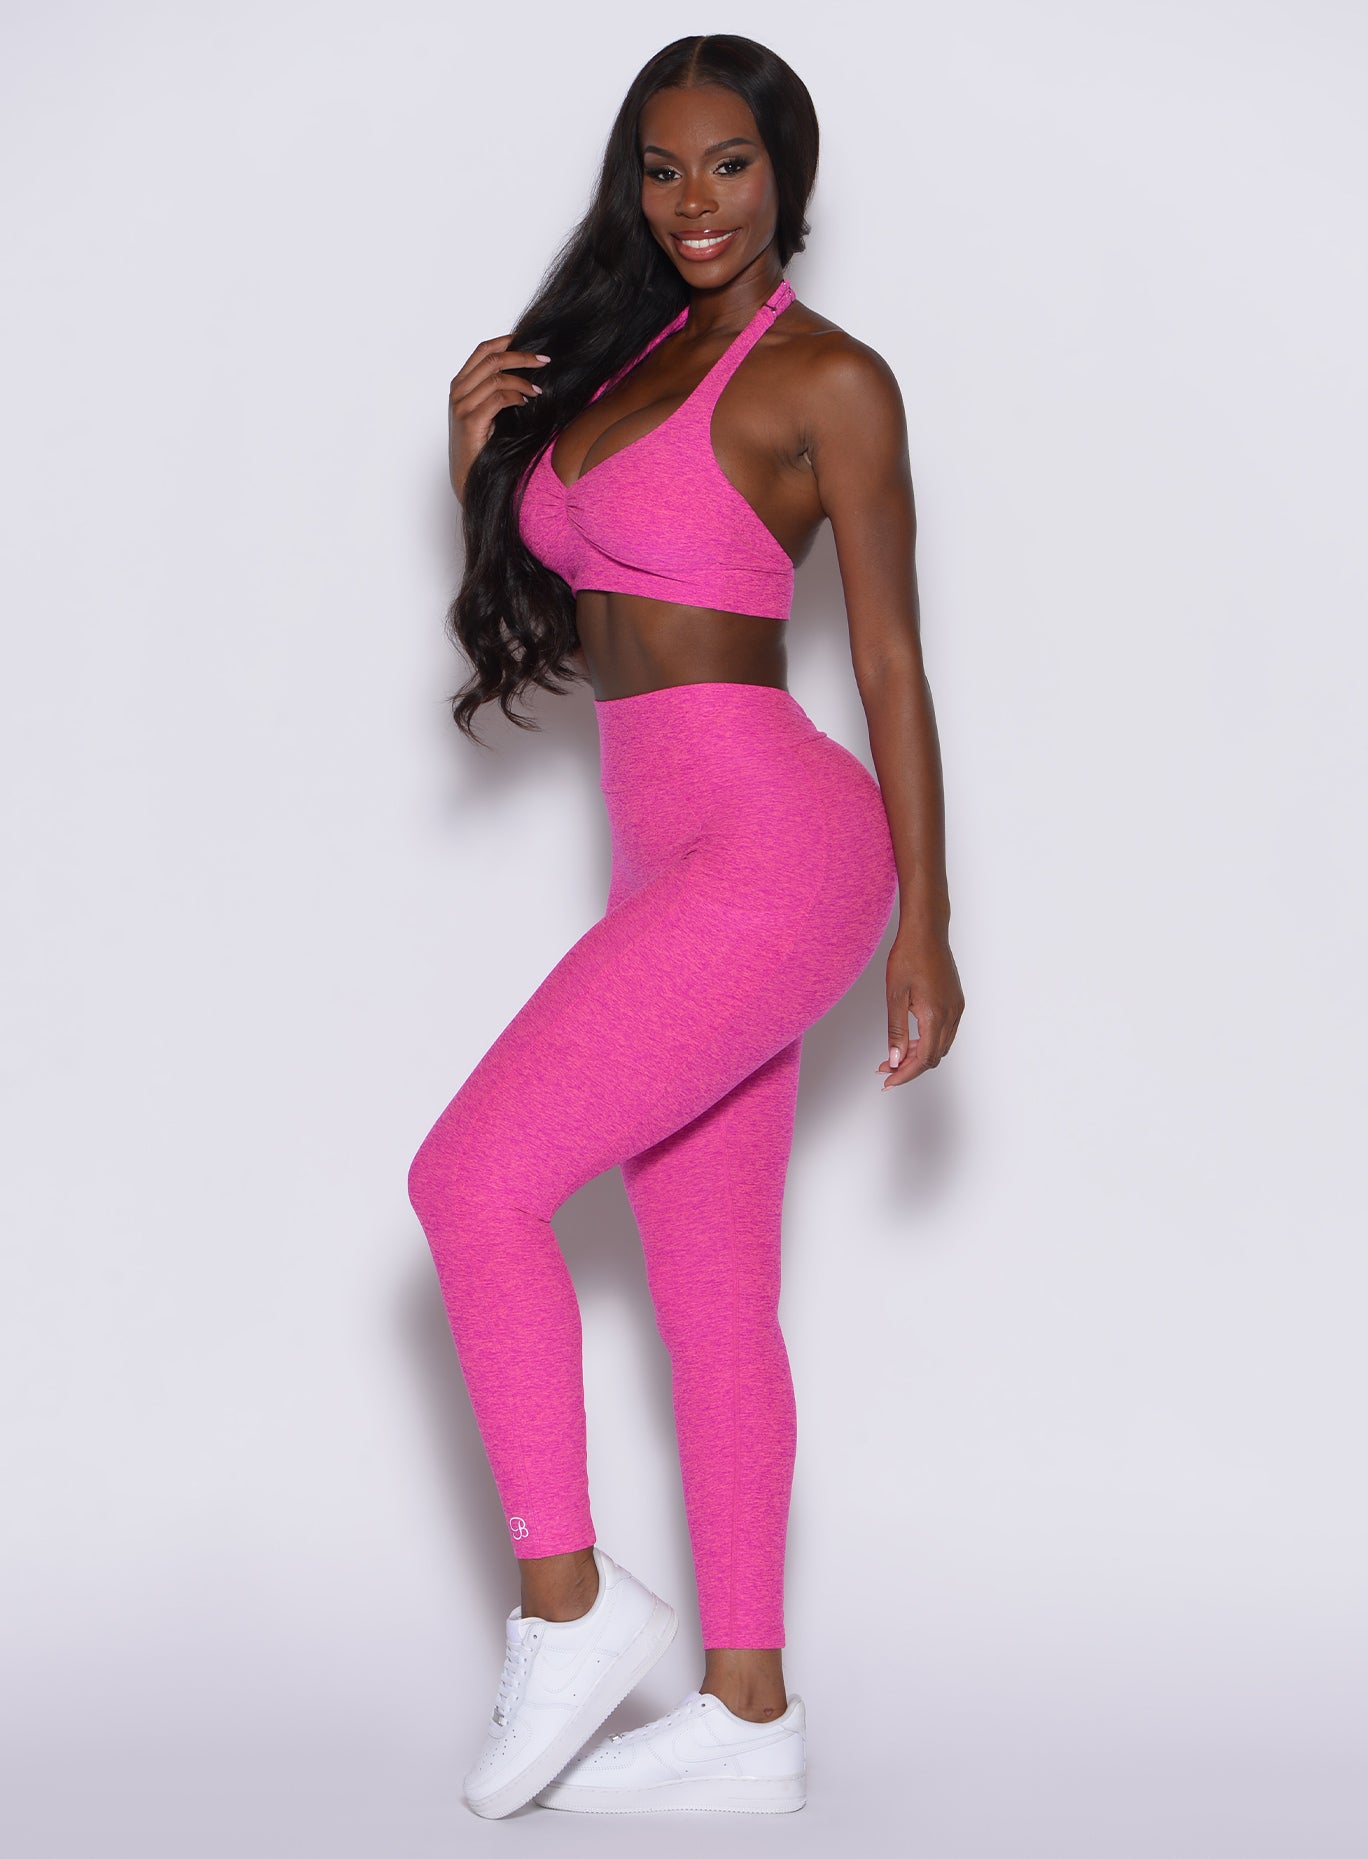 left side profile view of a model angled slightly to her left wearing our V back leggings in Neon pink sorbet color along with a matching bra